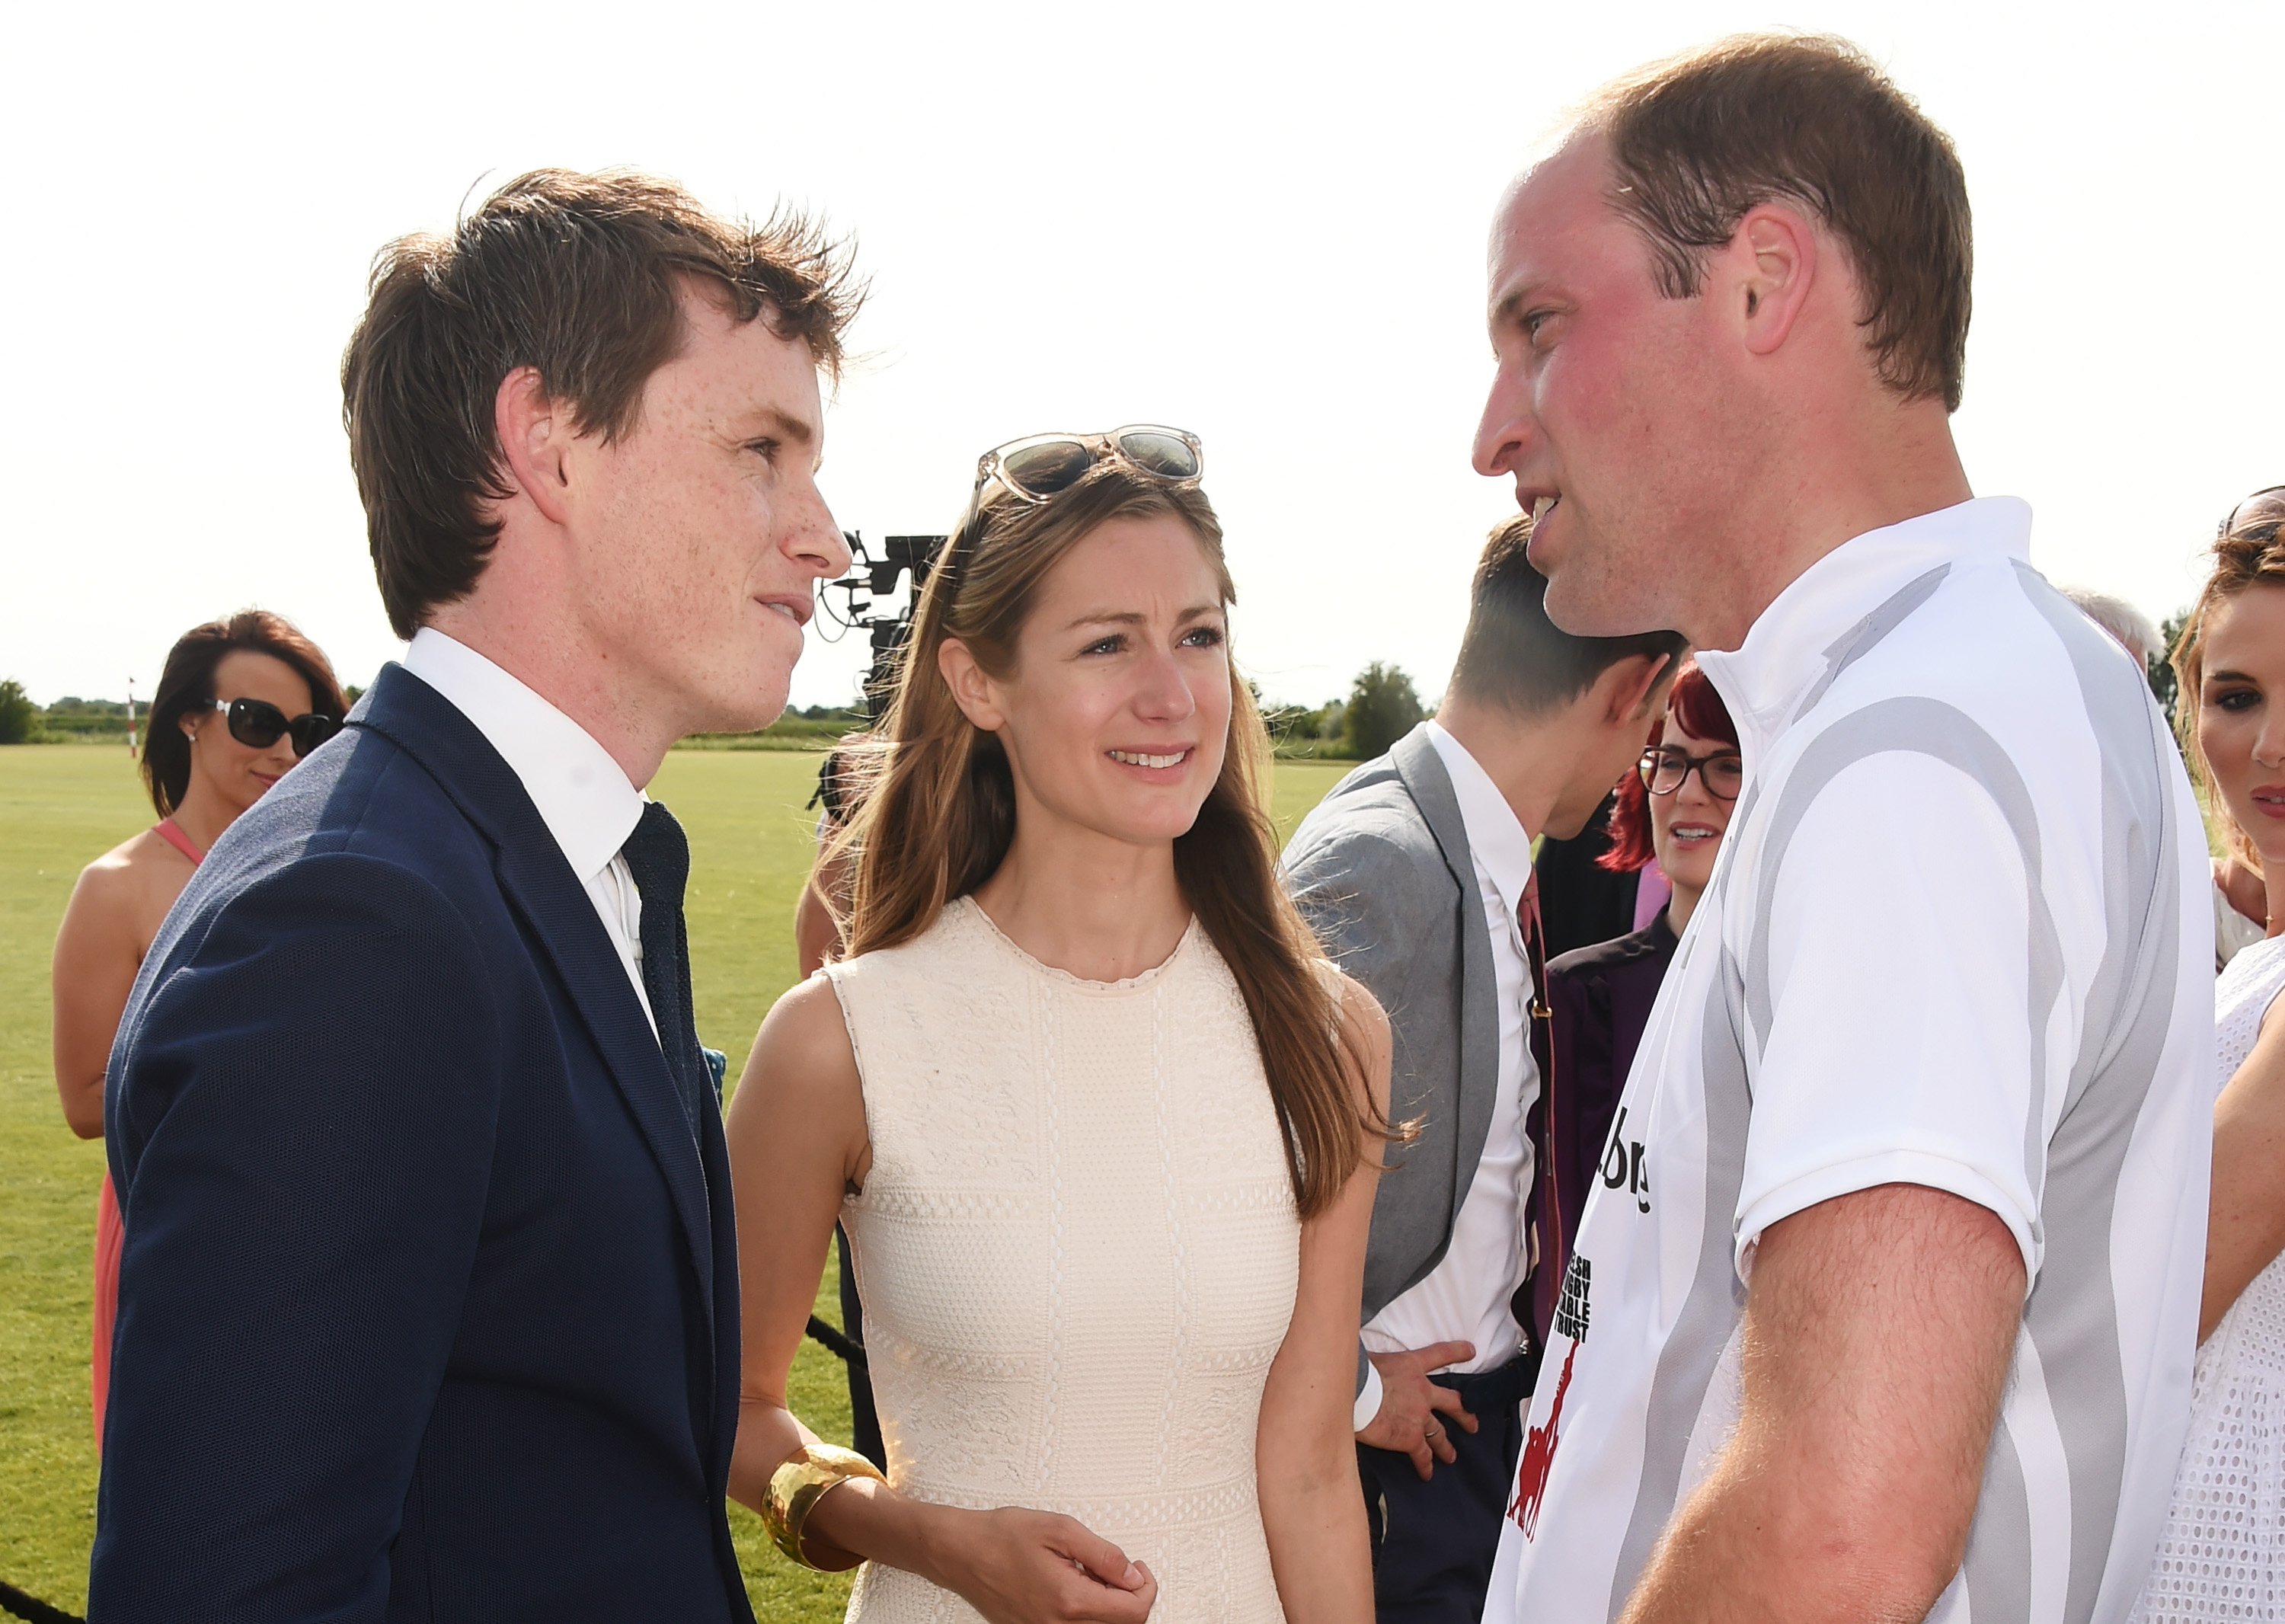 Eddie Redmayne, Hannah Bagshawe, and Prince William chatting at the Audi Polo Challenge in 2015